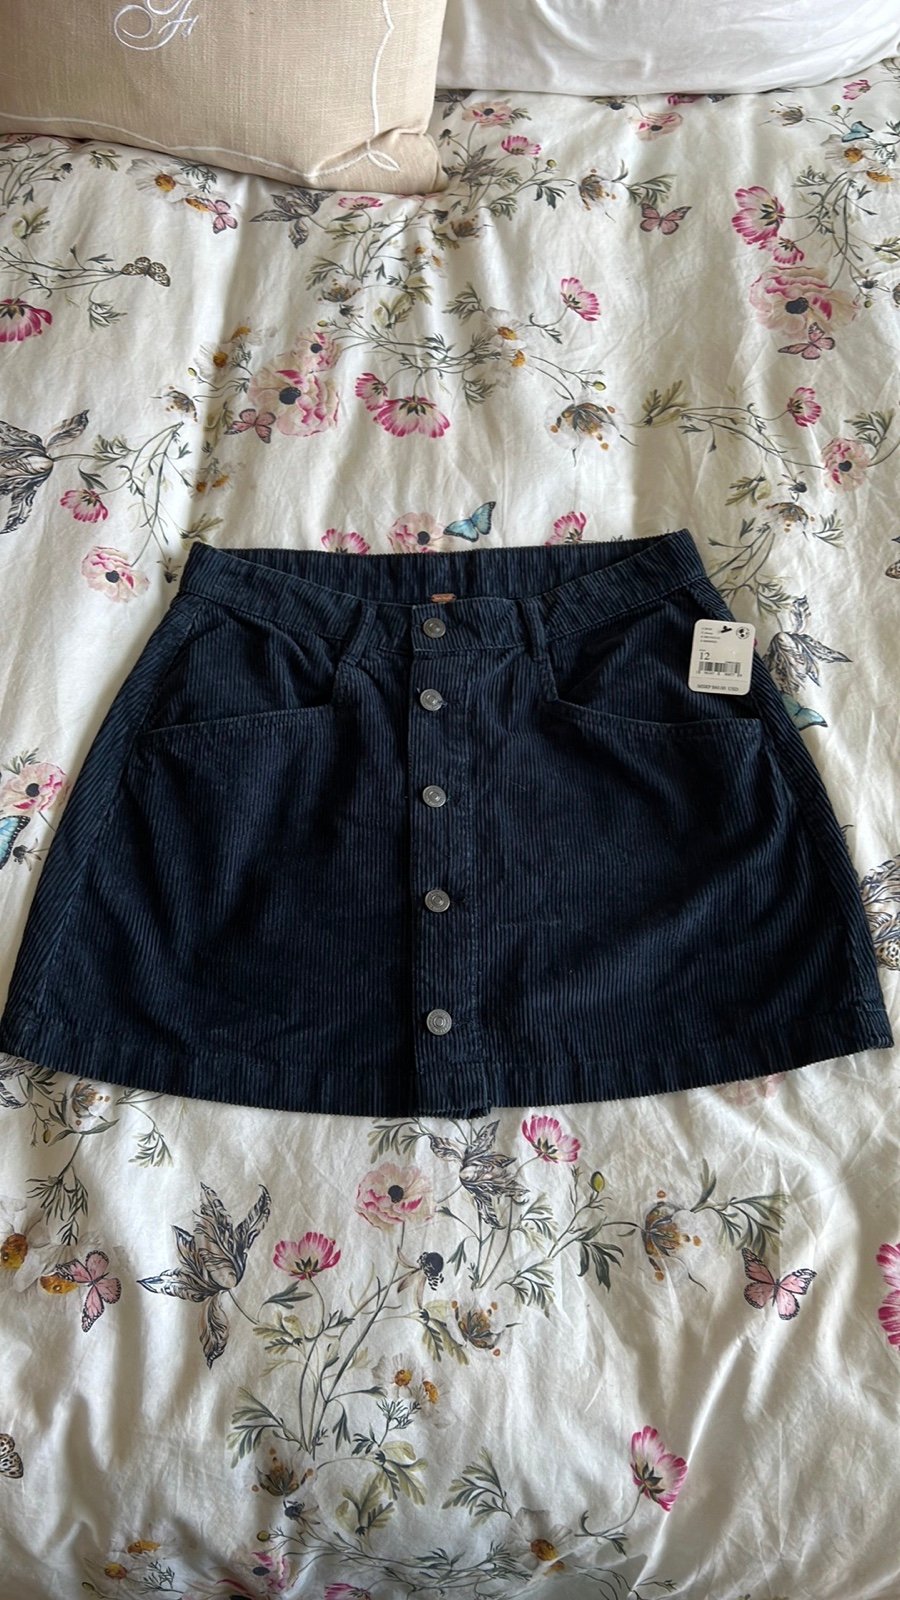 where to buy  Free People Corduroy Skirt pN02MgypP just